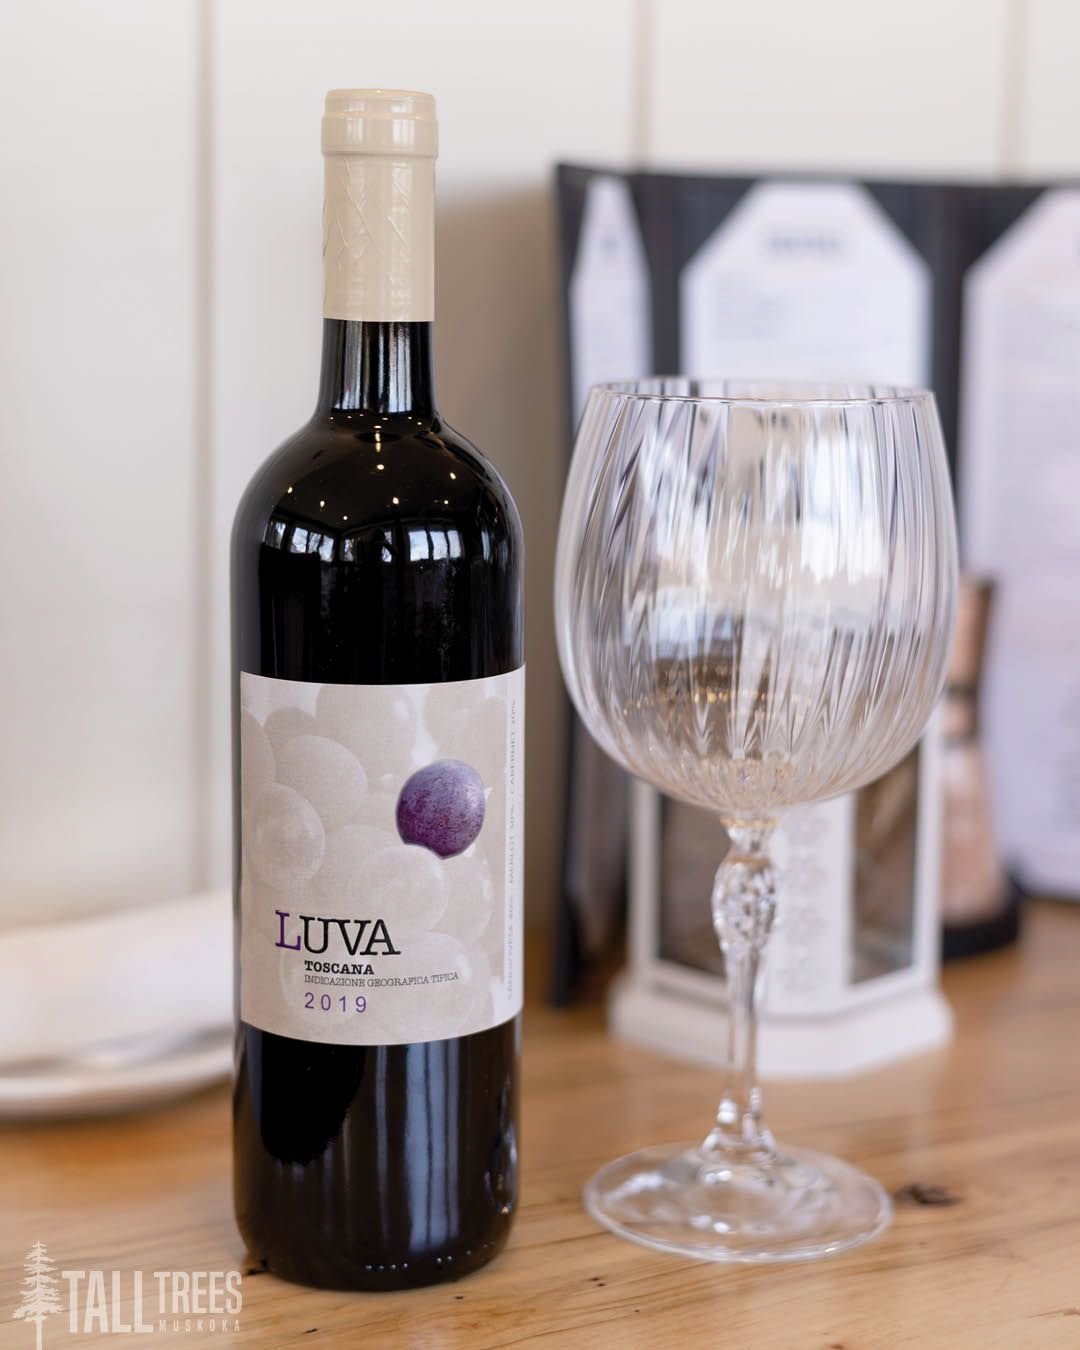 Indulge in the rich and complex flavours of this exclusive Super Tuscan from Luva, available only at Tall Trees and supplied by @bottlesandbarrelsinc. This unique blend boasts notes of juicy red fruit and decadent chocolate, perfectly balanced with s